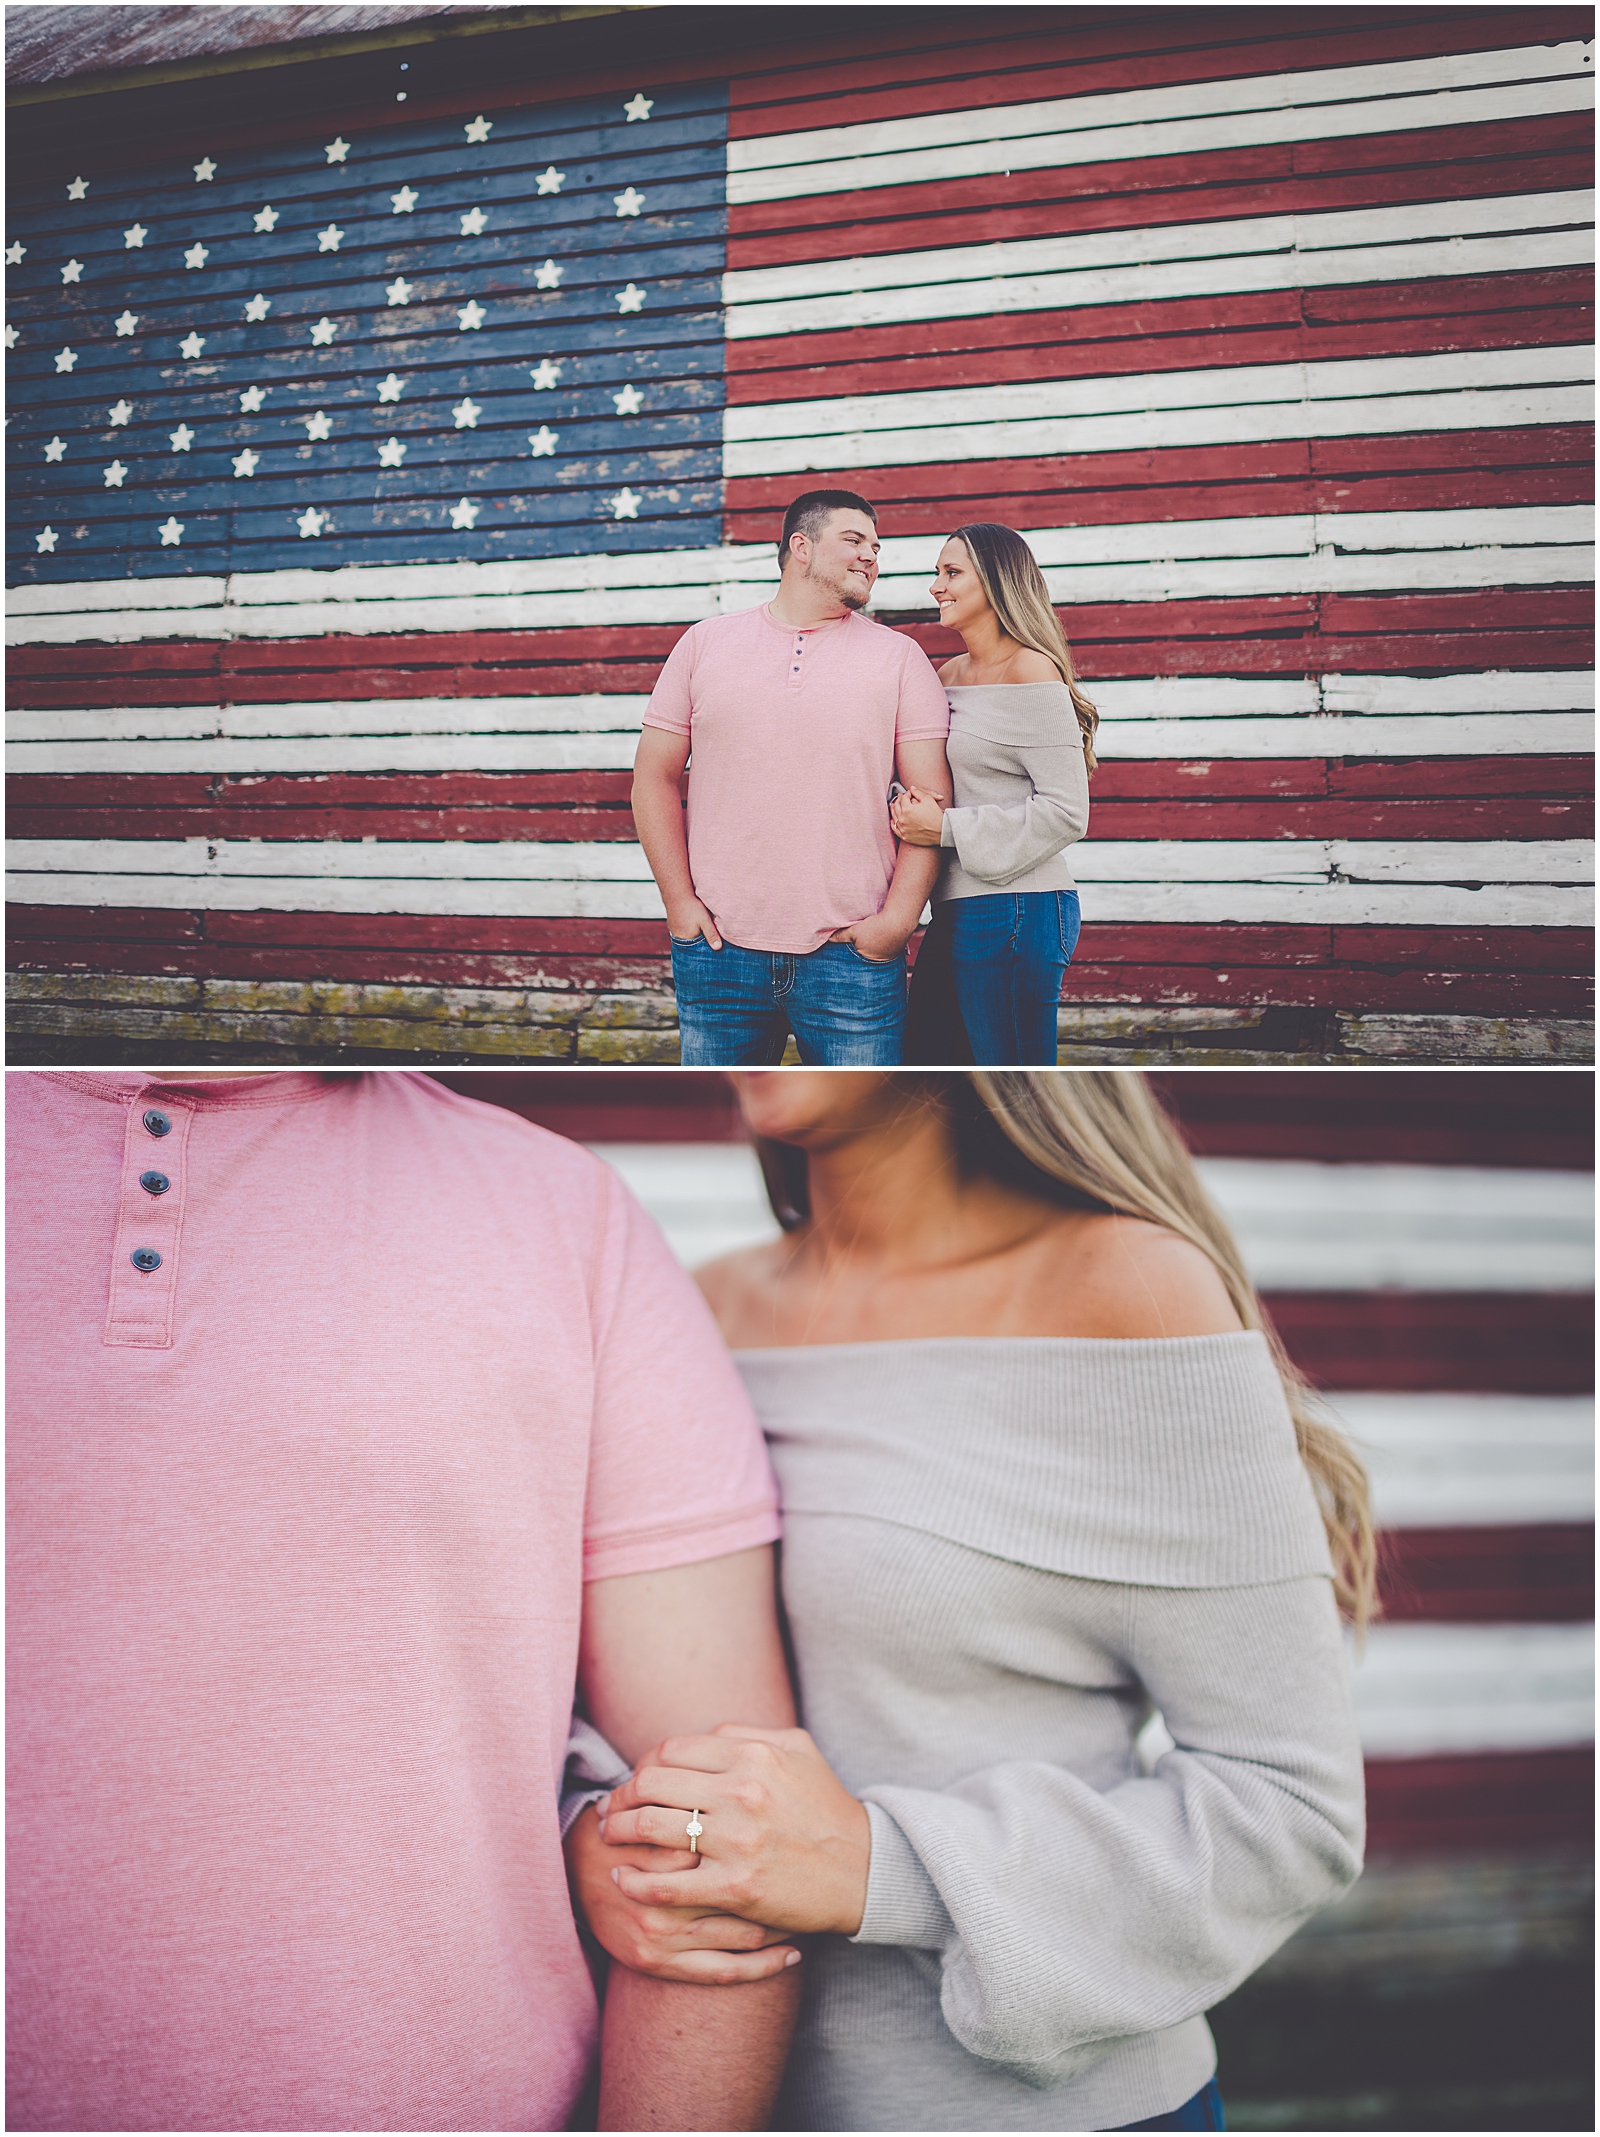 Holly and Kolton's summer Iroquois County engagement photos in Clifton, Illinois with Chicagoland wedding photographer Kara Evans Photographer.